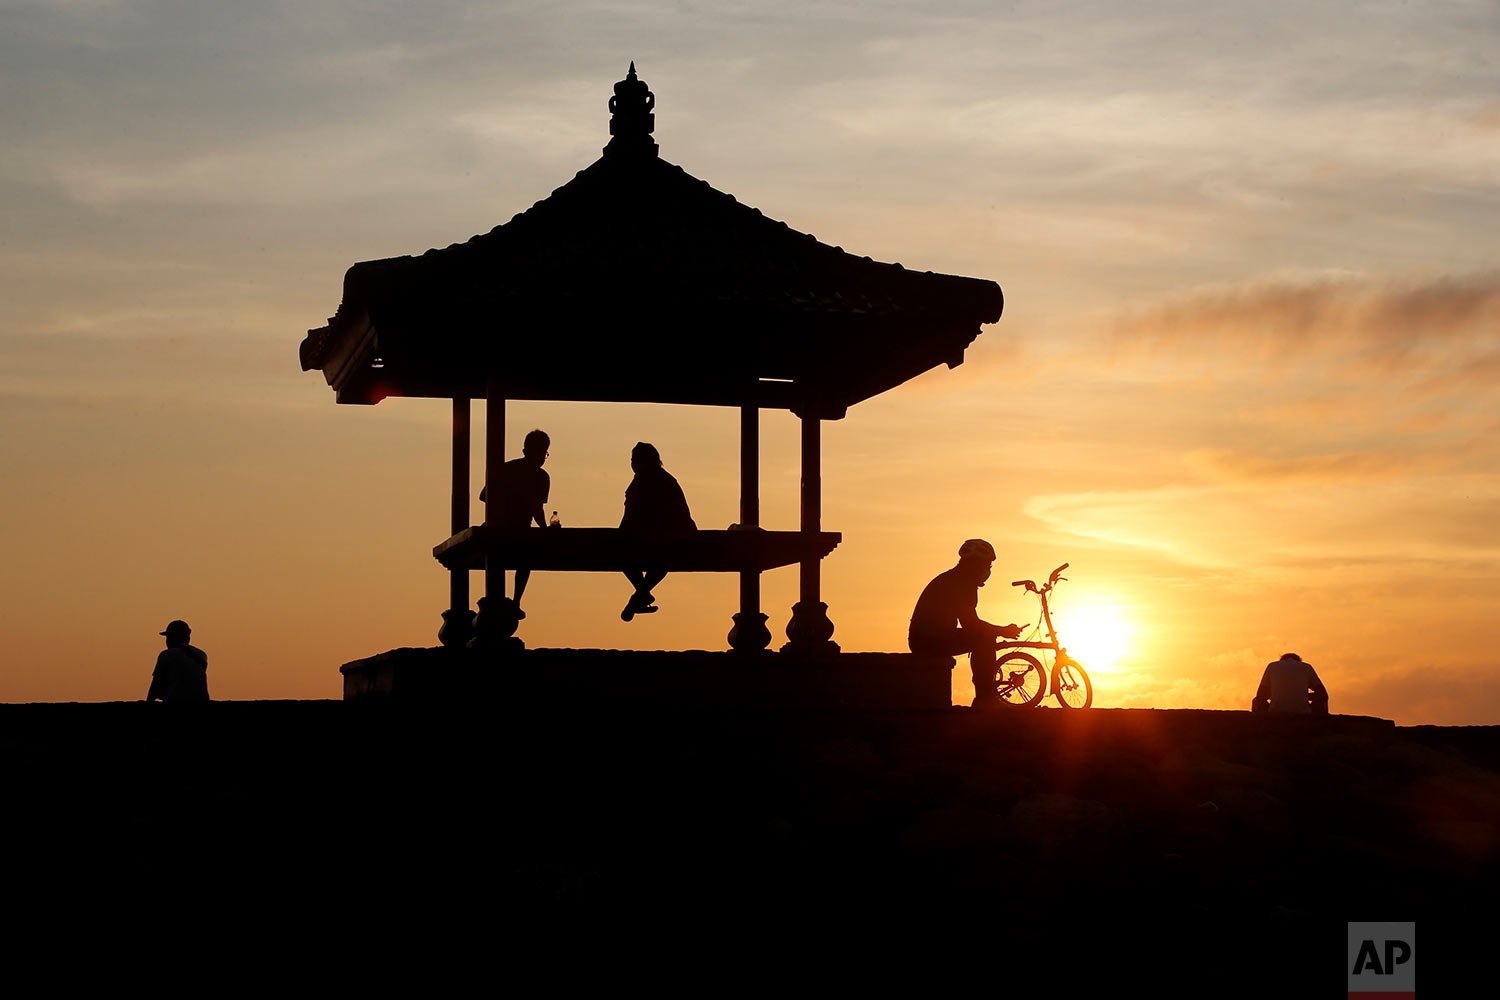  People watch the sun rise at the Sanur Beach in Denpasar, Bali, Indonesia, Thursday, Oct. 28, 2021. (AP Photo/Firdia Lisnawati) 